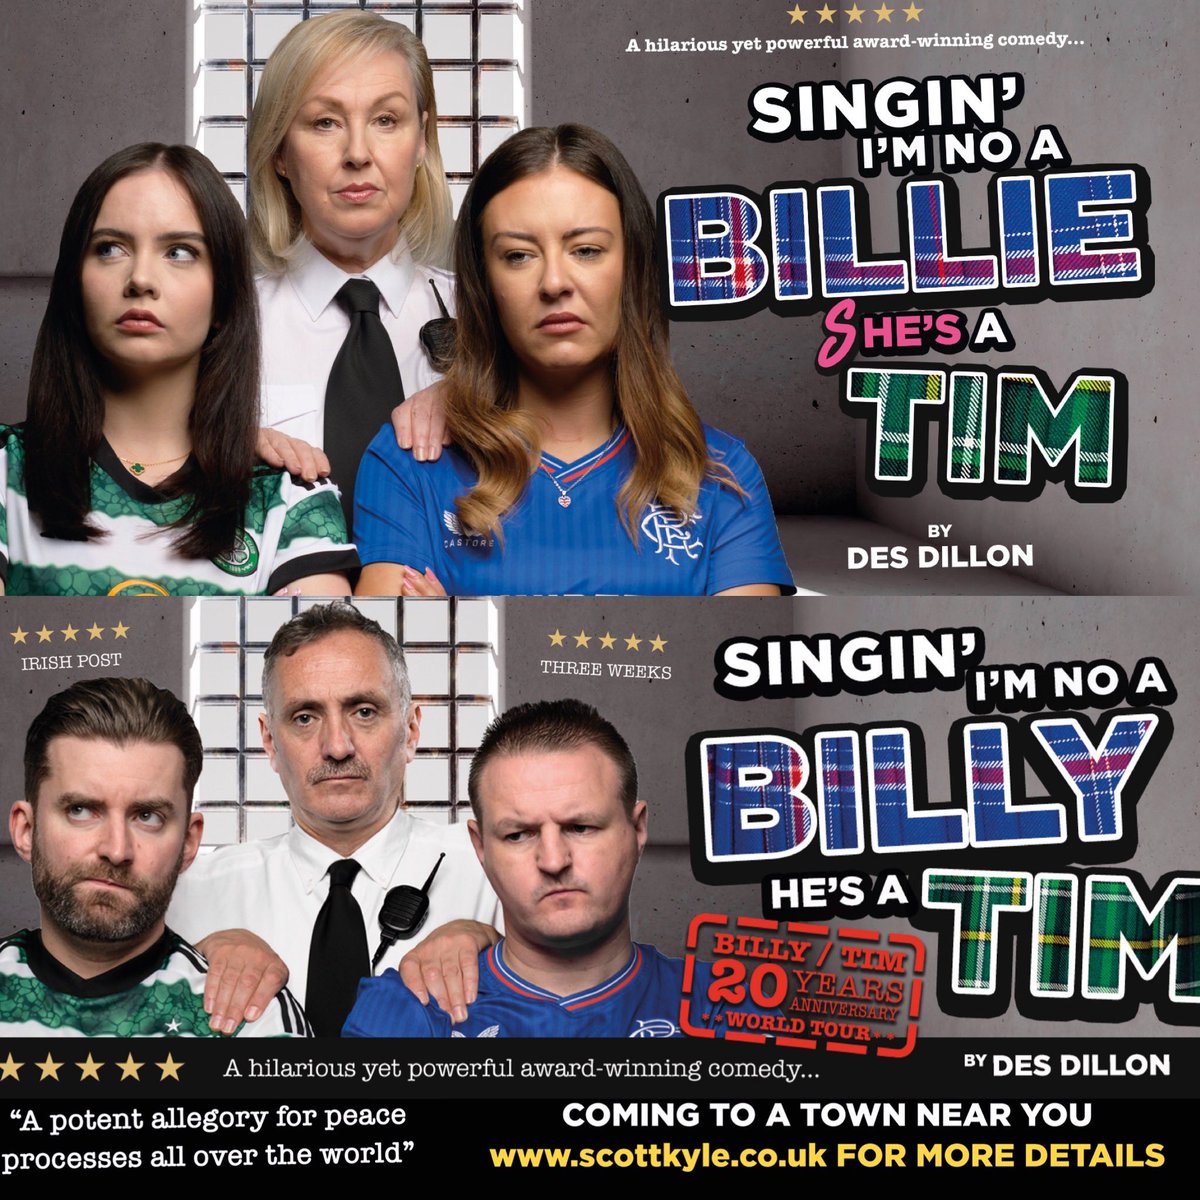 @TheKiltedPhoto Tour dates and tickets at scottkyle.co.uk

SINGIN’ I’M NO A BILLY HE’S A TIM - ⭐️ WINNER OF THE STAGE AWARD FOR ACTING EXCELLENCE ⭐️ – 20TH ANNIVERSARY TOUR 2024/25

A play exploring bigotry and ethnic identity, “Singin’ I’m No A Billy, He’s A Tim” is a…